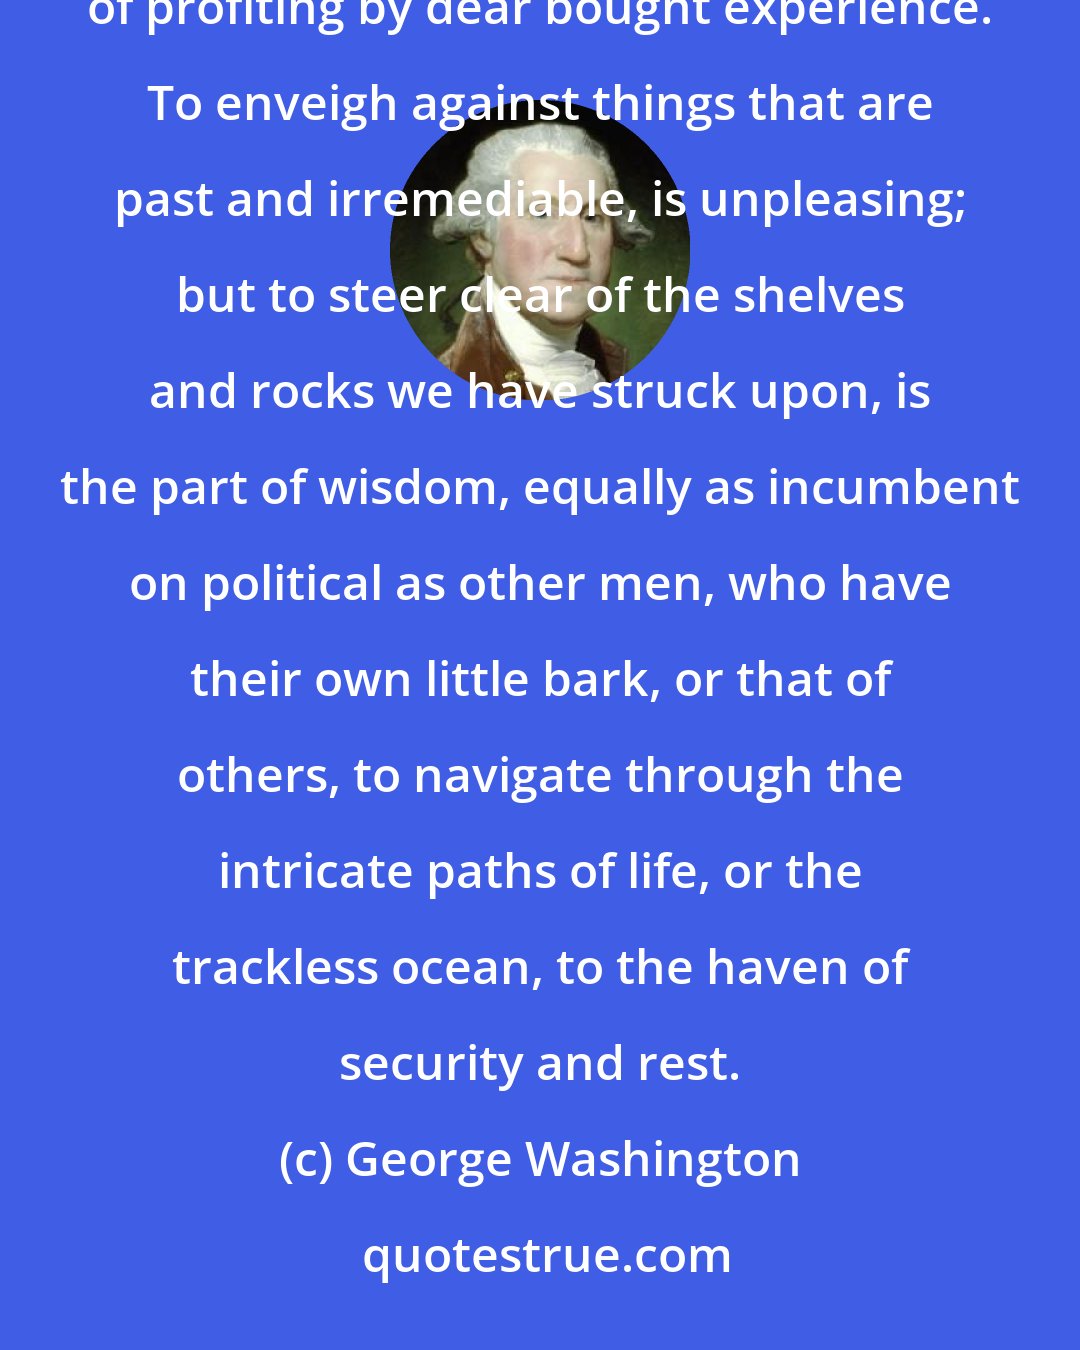 George Washington: We ought not to look back, unless it is to derive useful lessons from past errors, and for the purpose of profiting by dear bought experience. To enveigh against things that are past and irremediable, is unpleasing; but to steer clear of the shelves and rocks we have struck upon, is the part of wisdom, equally as incumbent on political as other men, who have their own little bark, or that of others, to navigate through the intricate paths of life, or the trackless ocean, to the haven of security and rest.